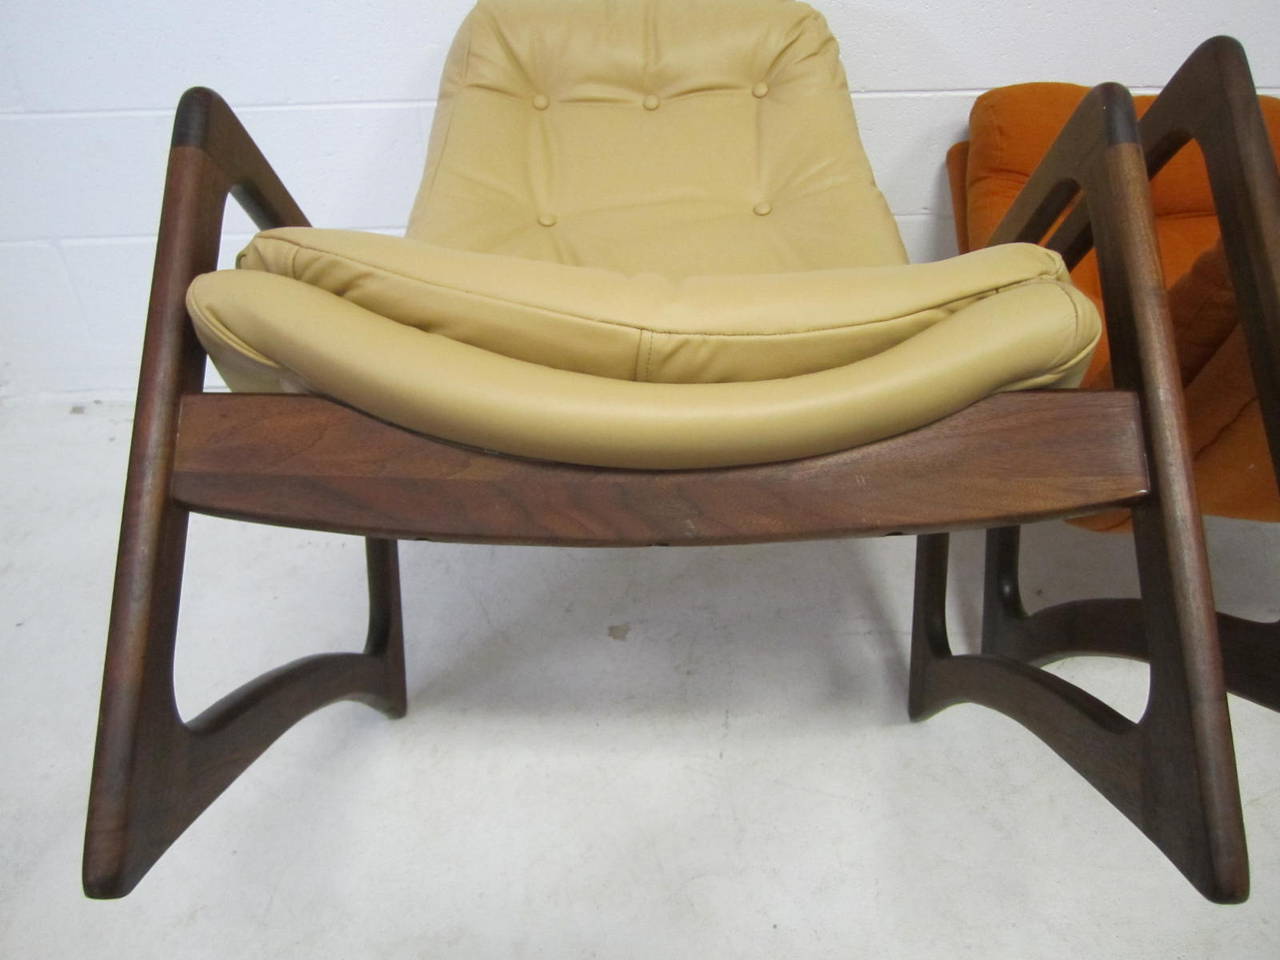 Upholstery Sculptural Pair of Adrian Pearsall Walnut Lounge Chairs Mid-Century Modern For Sale